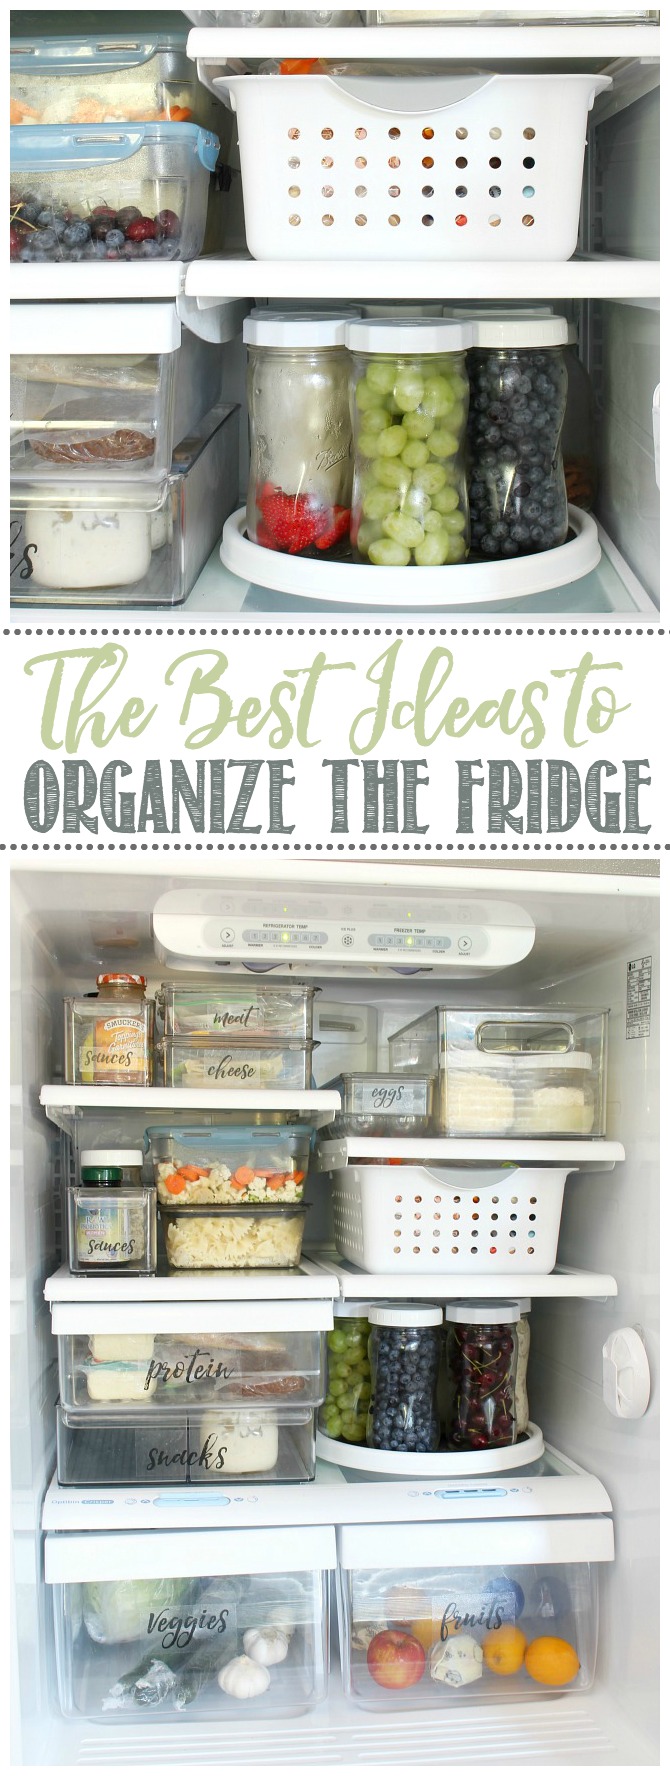 https://www.cleanandscentsible.com/wp-content/uploads/2018/08/The-best-ideas-to-organize-the-fridge.jpg